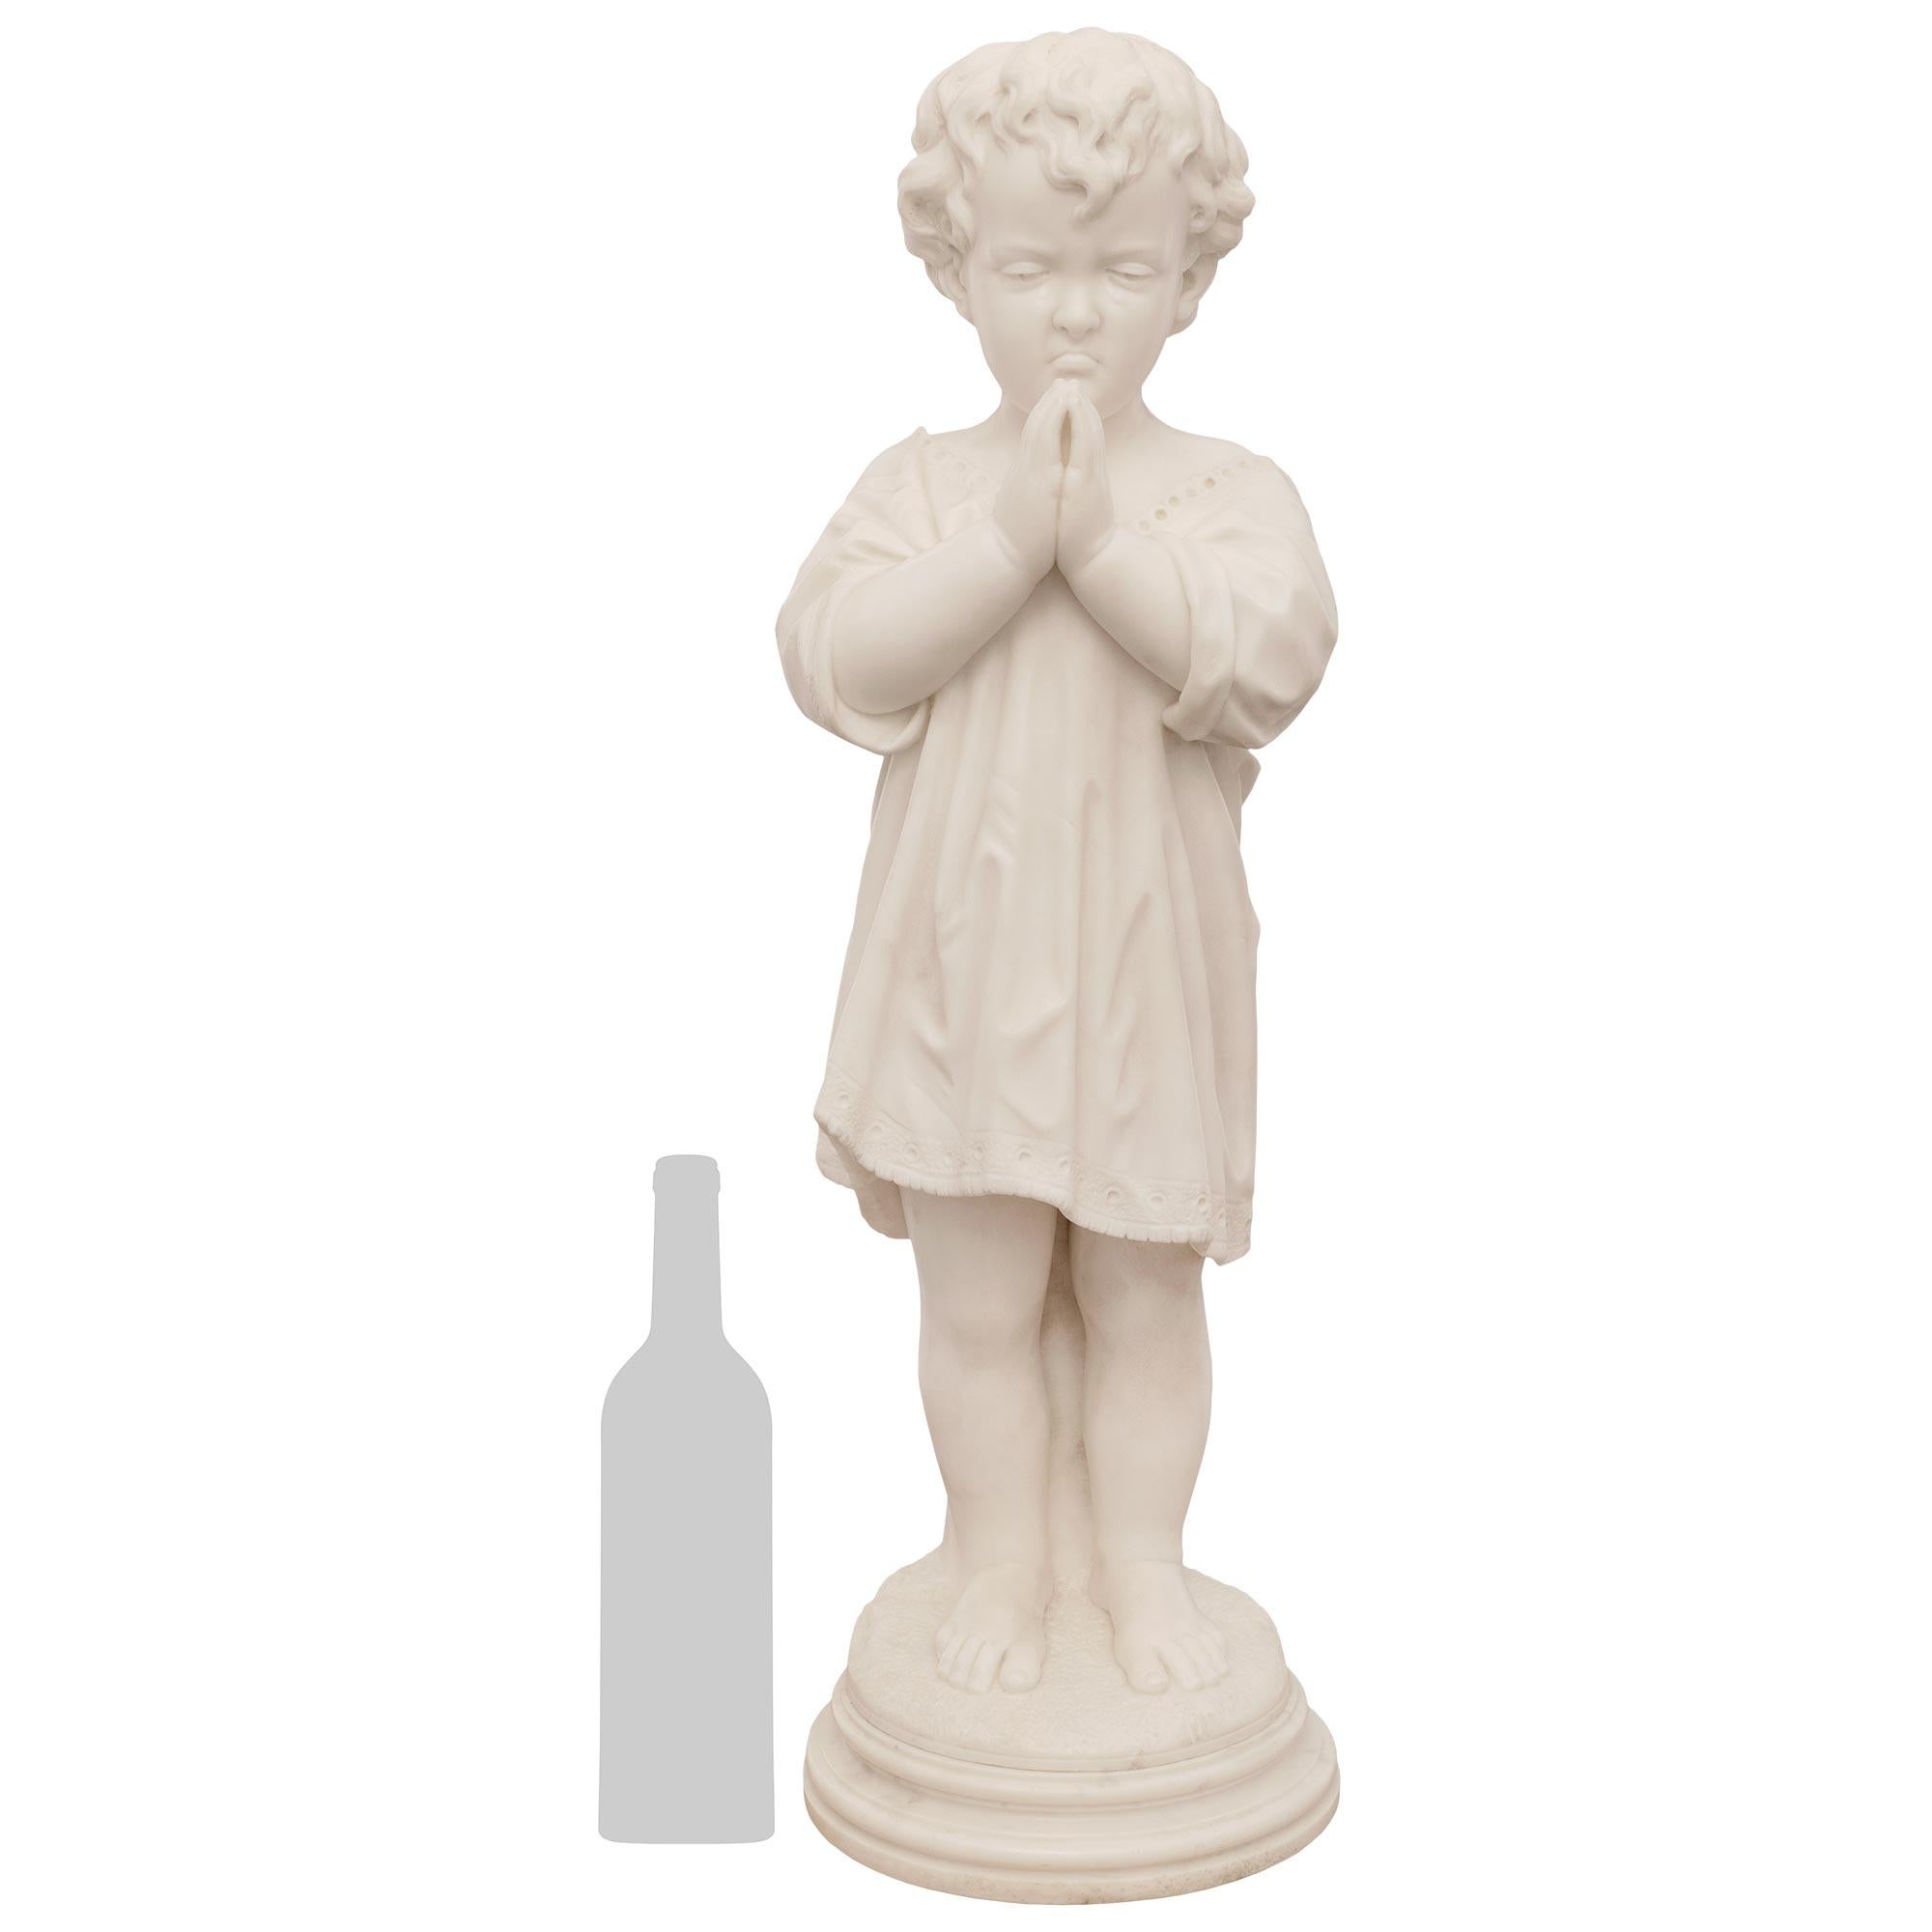 A charming Italian 19th century white Carrara marble statue of a young boy signed Pietro Franchi, Rome. The praying boy is raised on a circular mottled pedestal and is wearing classical attire while holding his hands together to pray. A tear is